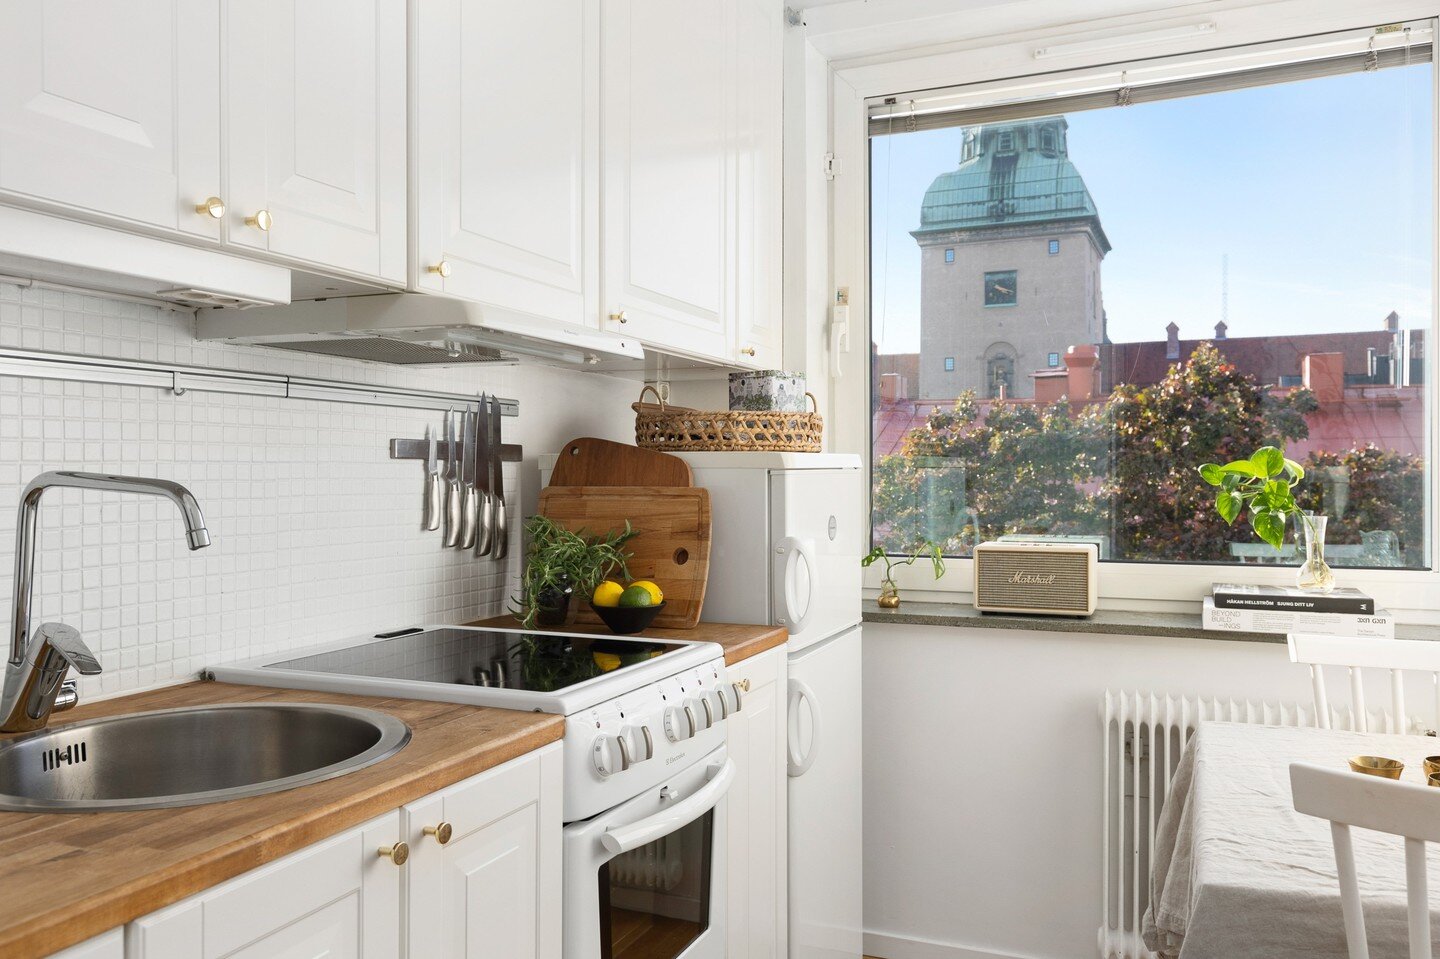 Imagine doing your washing up or downing a cup of coffee in the morning overlooking R&aring;dhuset in Stockholm. 

Breathtaking! 

Broker: @mikael_fastighetsmaklare 

#interiordesign #interior #nordicchrome
#nordicliving
#interior4all
#interiordesign